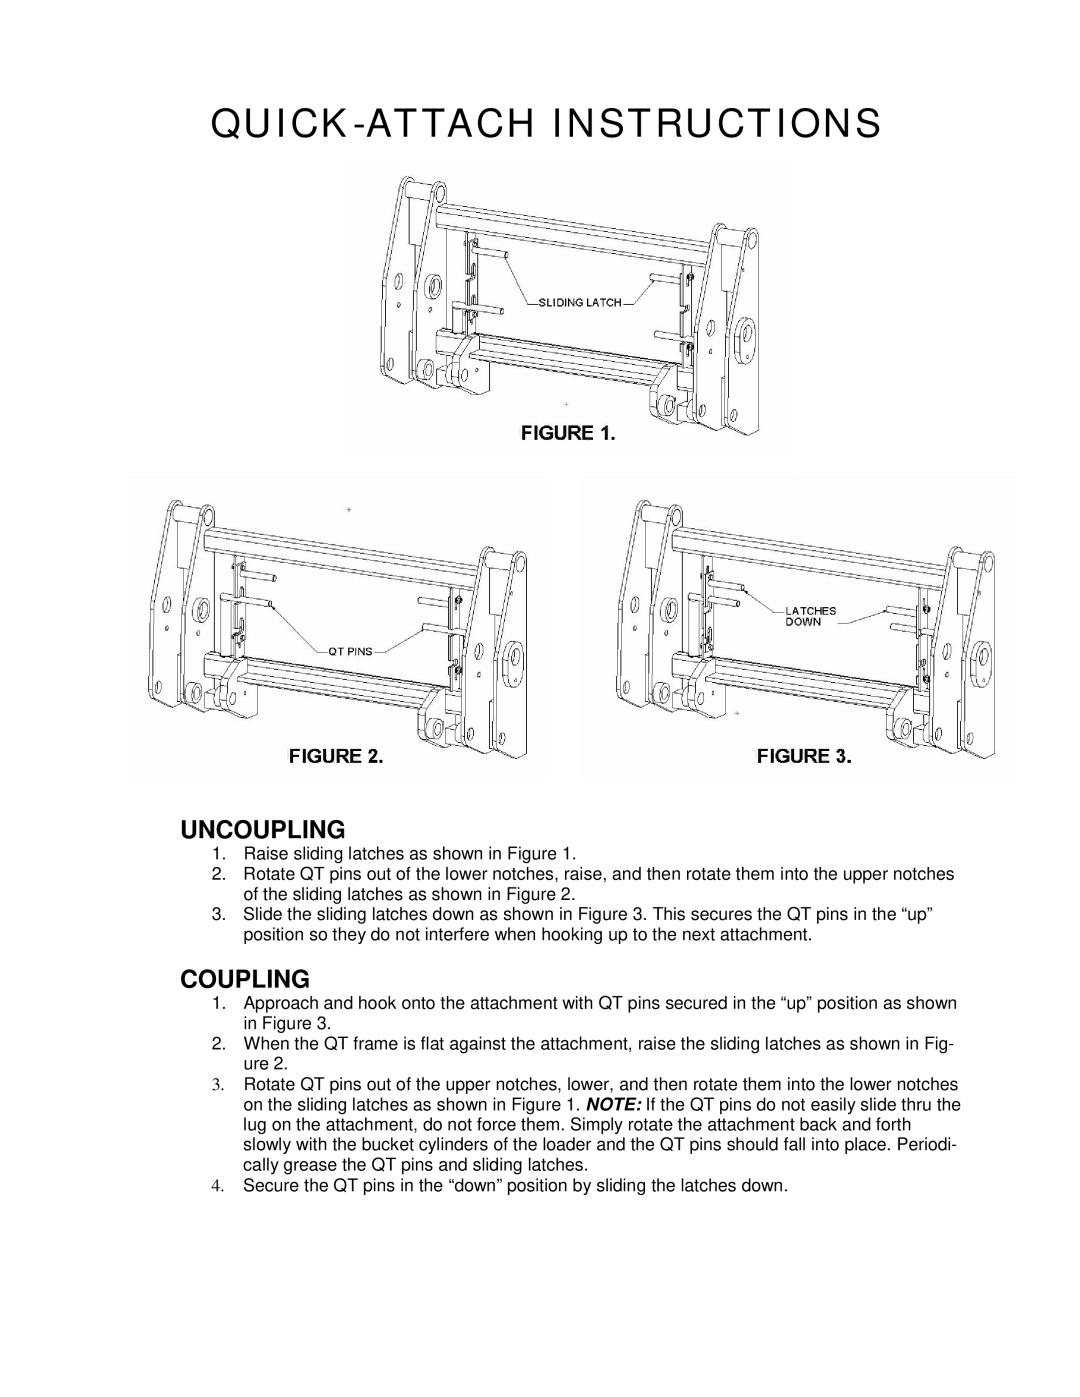 Miller Electric GP30 owner manual Quick-Attach Instructions, Uncoupling, Coupling 